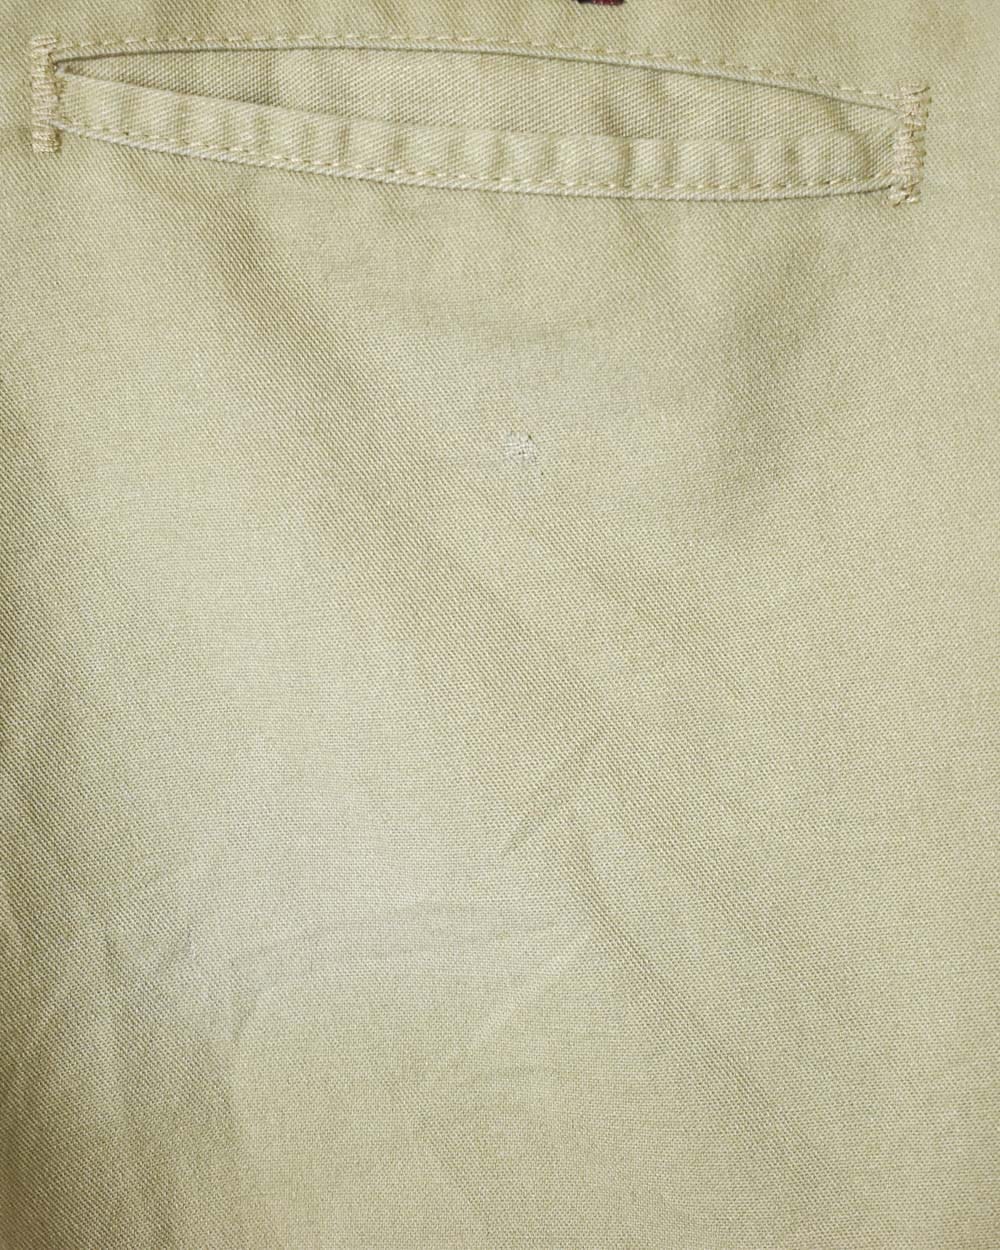 Neutral Dickies Cargo Trousers - W40 L29